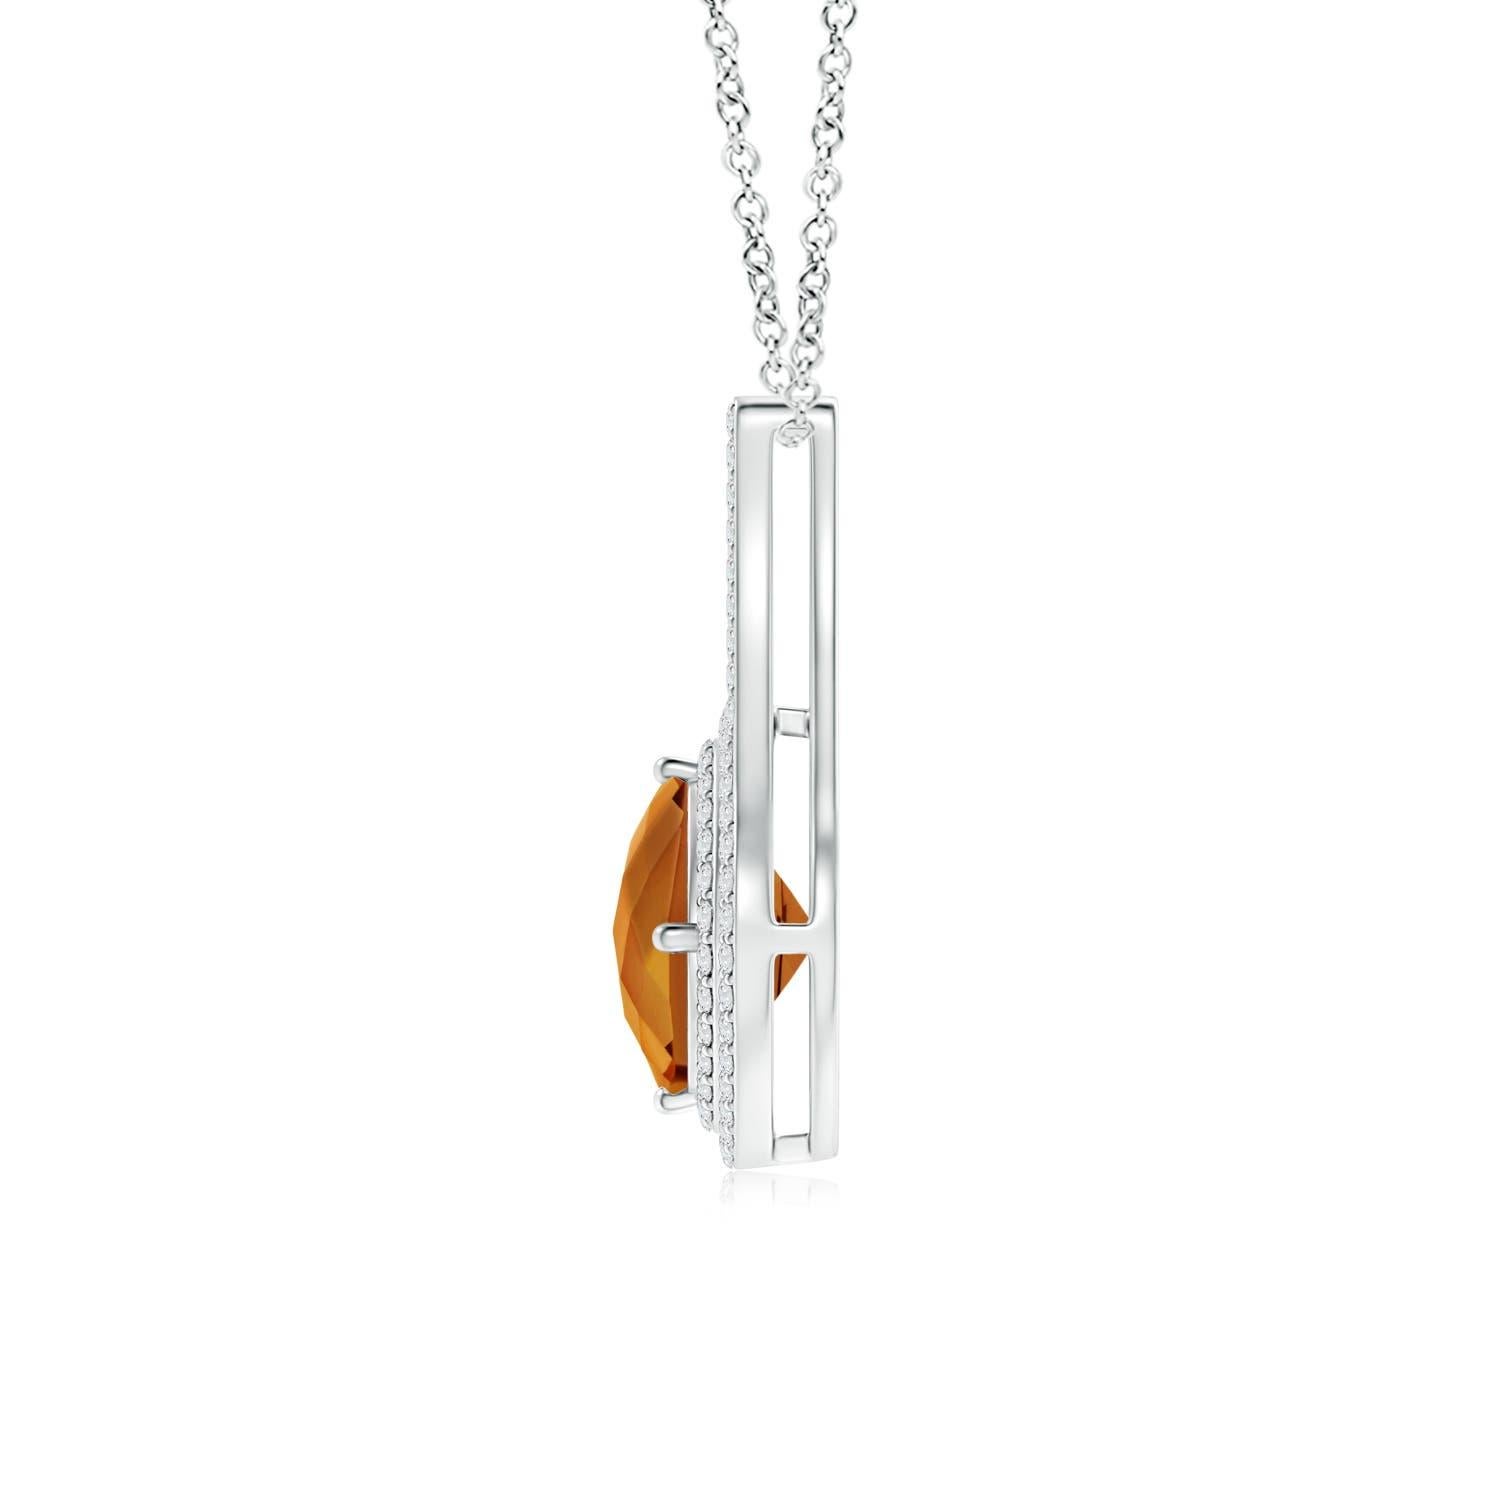 This splendid 18K White Gold pendant is designed with a dazzling inverted V-bale. It features a stunning GIA certified cushion yellowish orange zircon that is prong-set sideways and illuminated by a double halo of shimmering diamonds.
